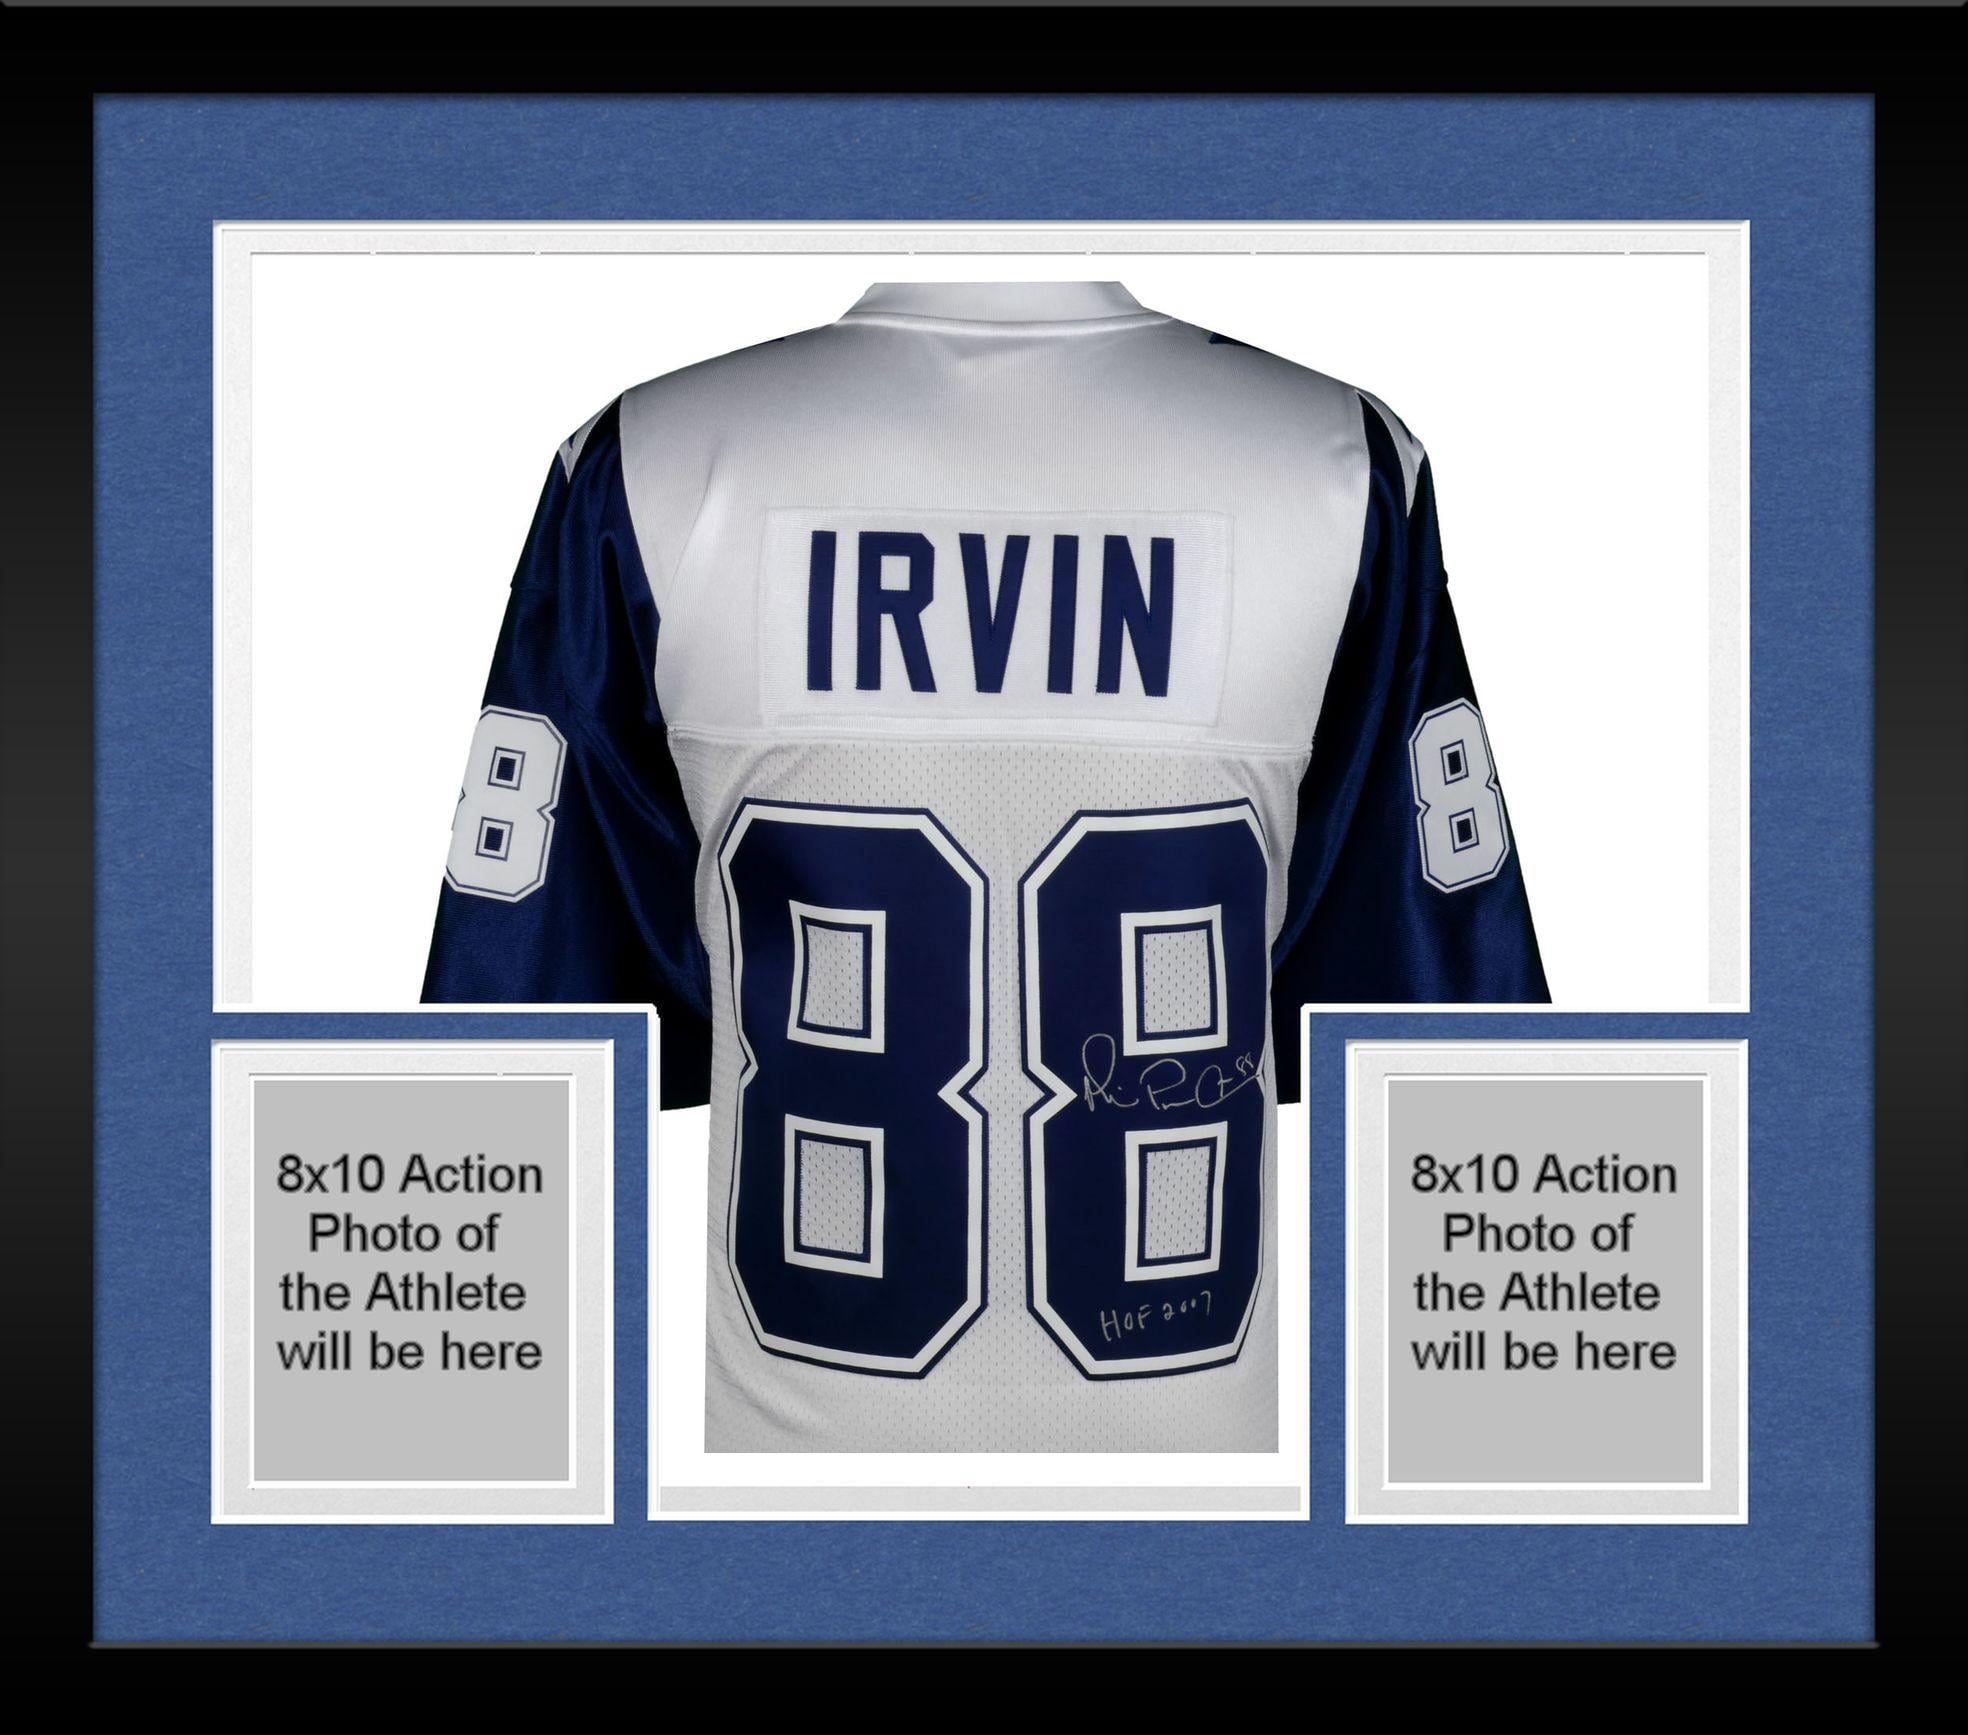 mitchell and ness michael irvin jersey